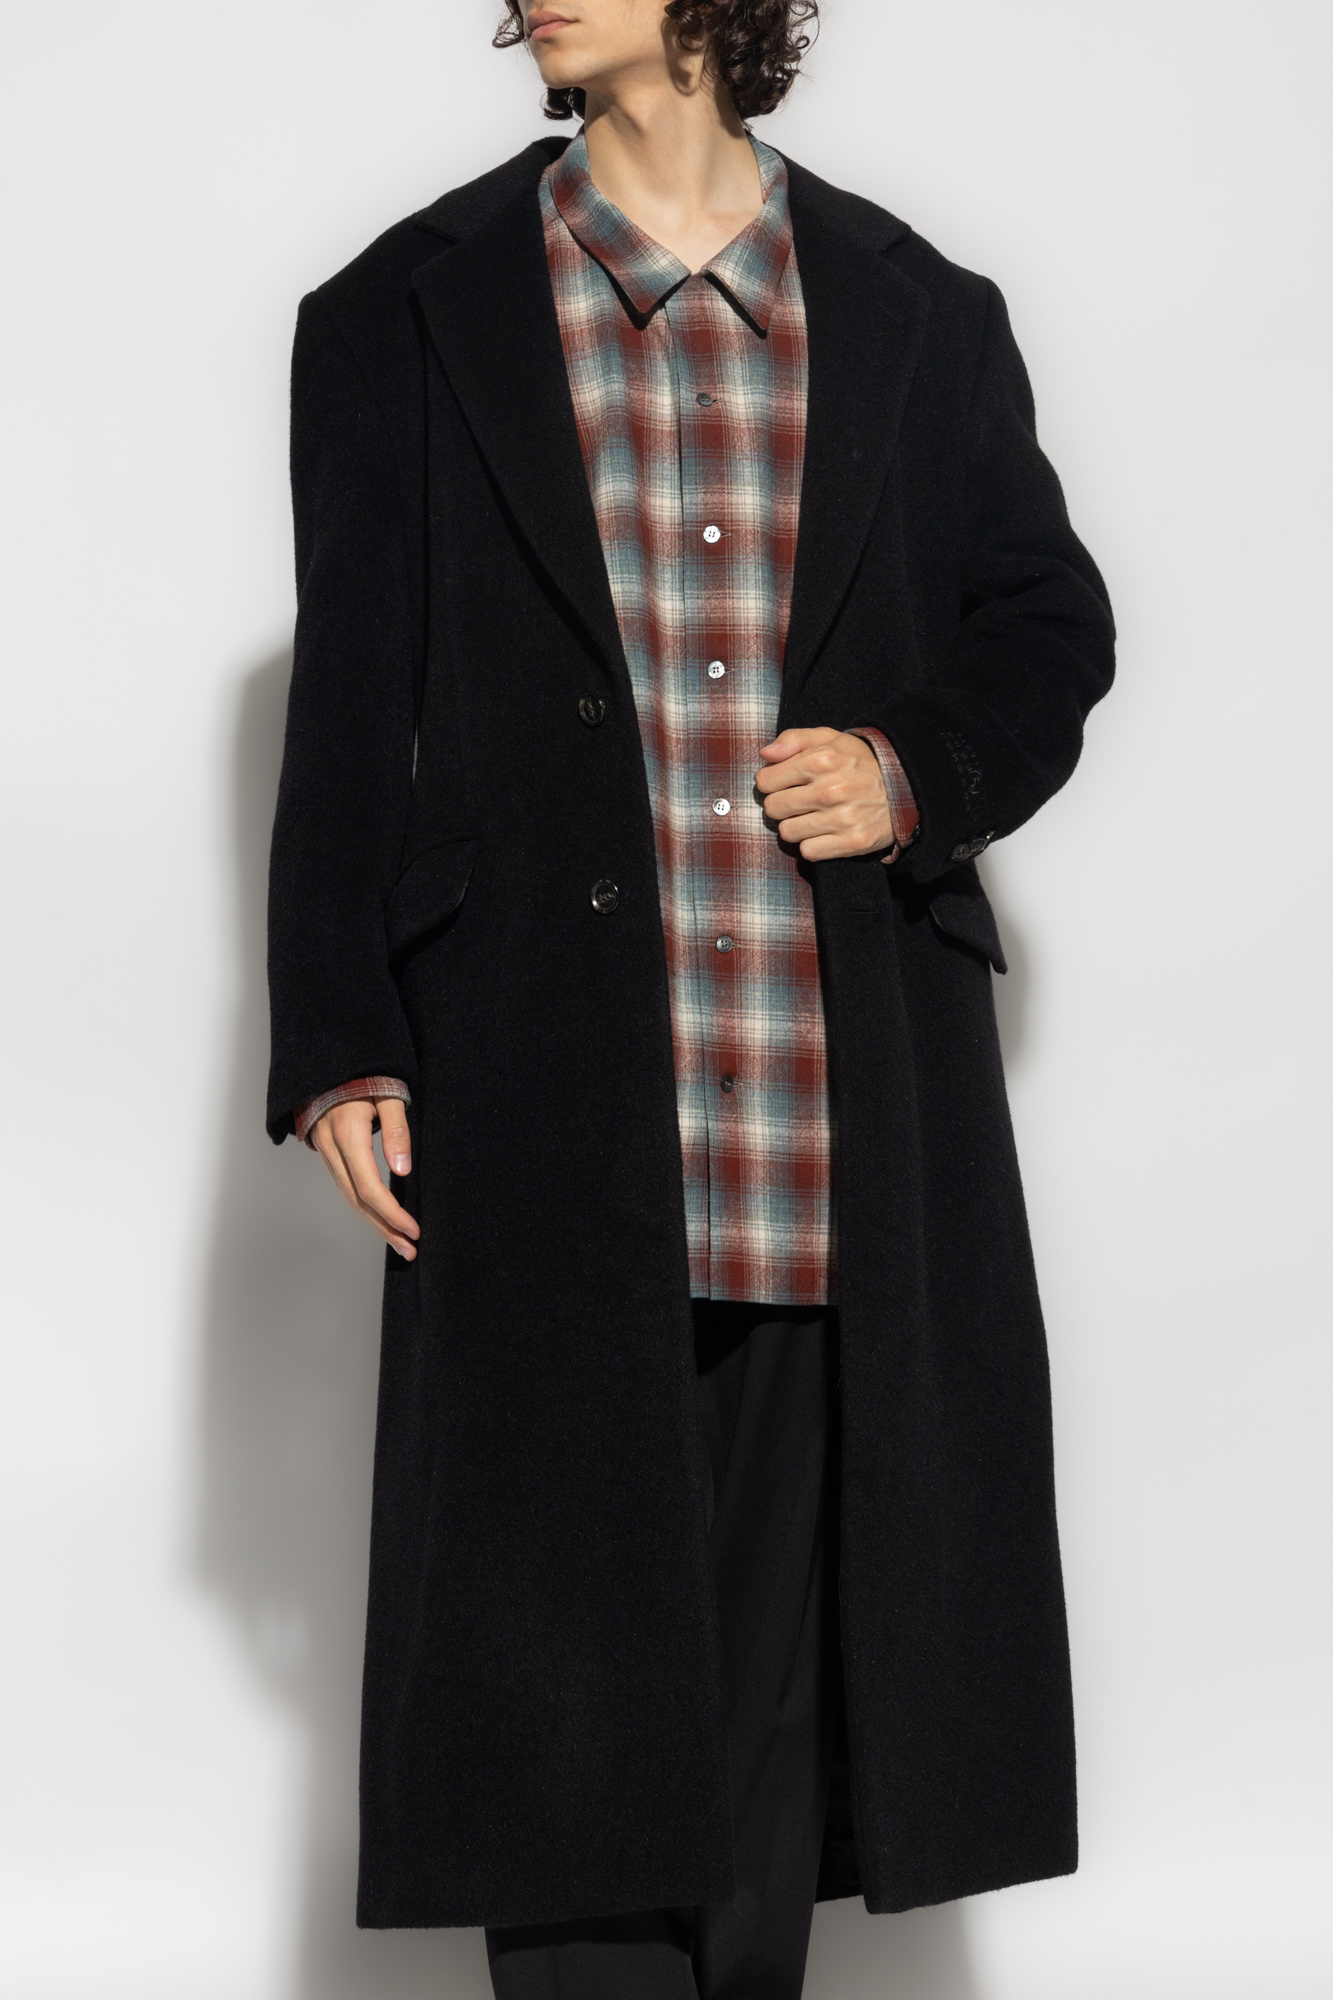 HOW TO STYLE DENIM Long wool coat